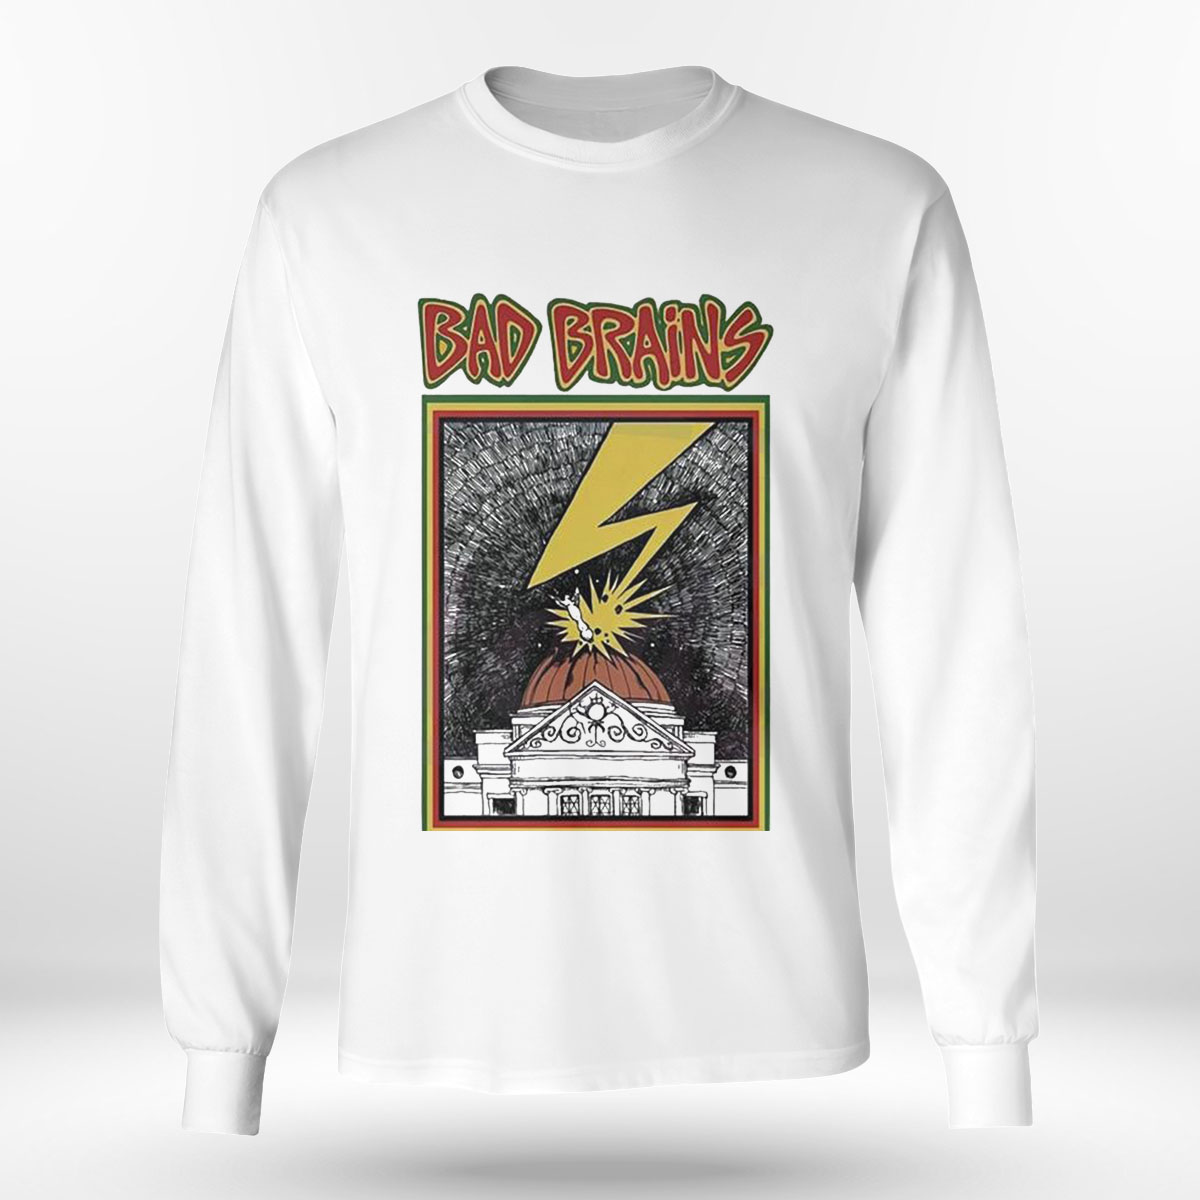 Buy Vintage Bad Brains Longsleeve Tshirt American Hardcore Punk Concert  Tour Band Tee ROIR Reachout International Records Size Small Online in  India 